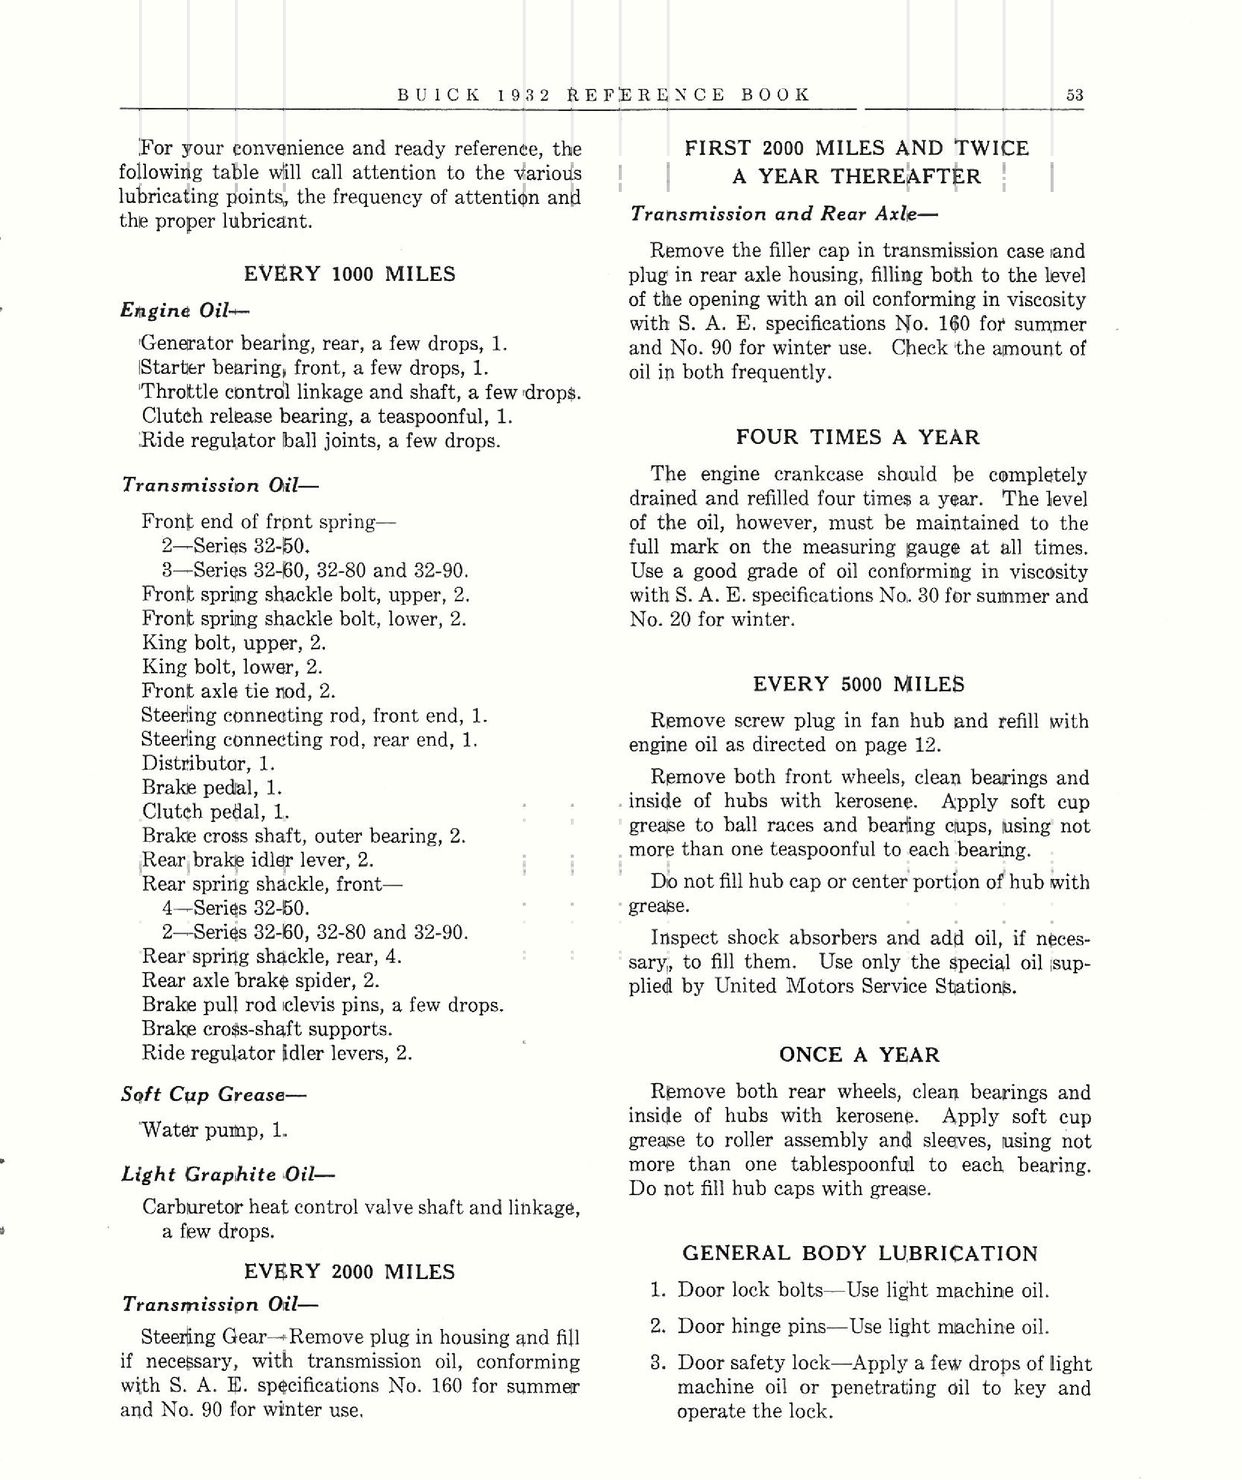 n_1932 Buick Reference Book-53.jpg